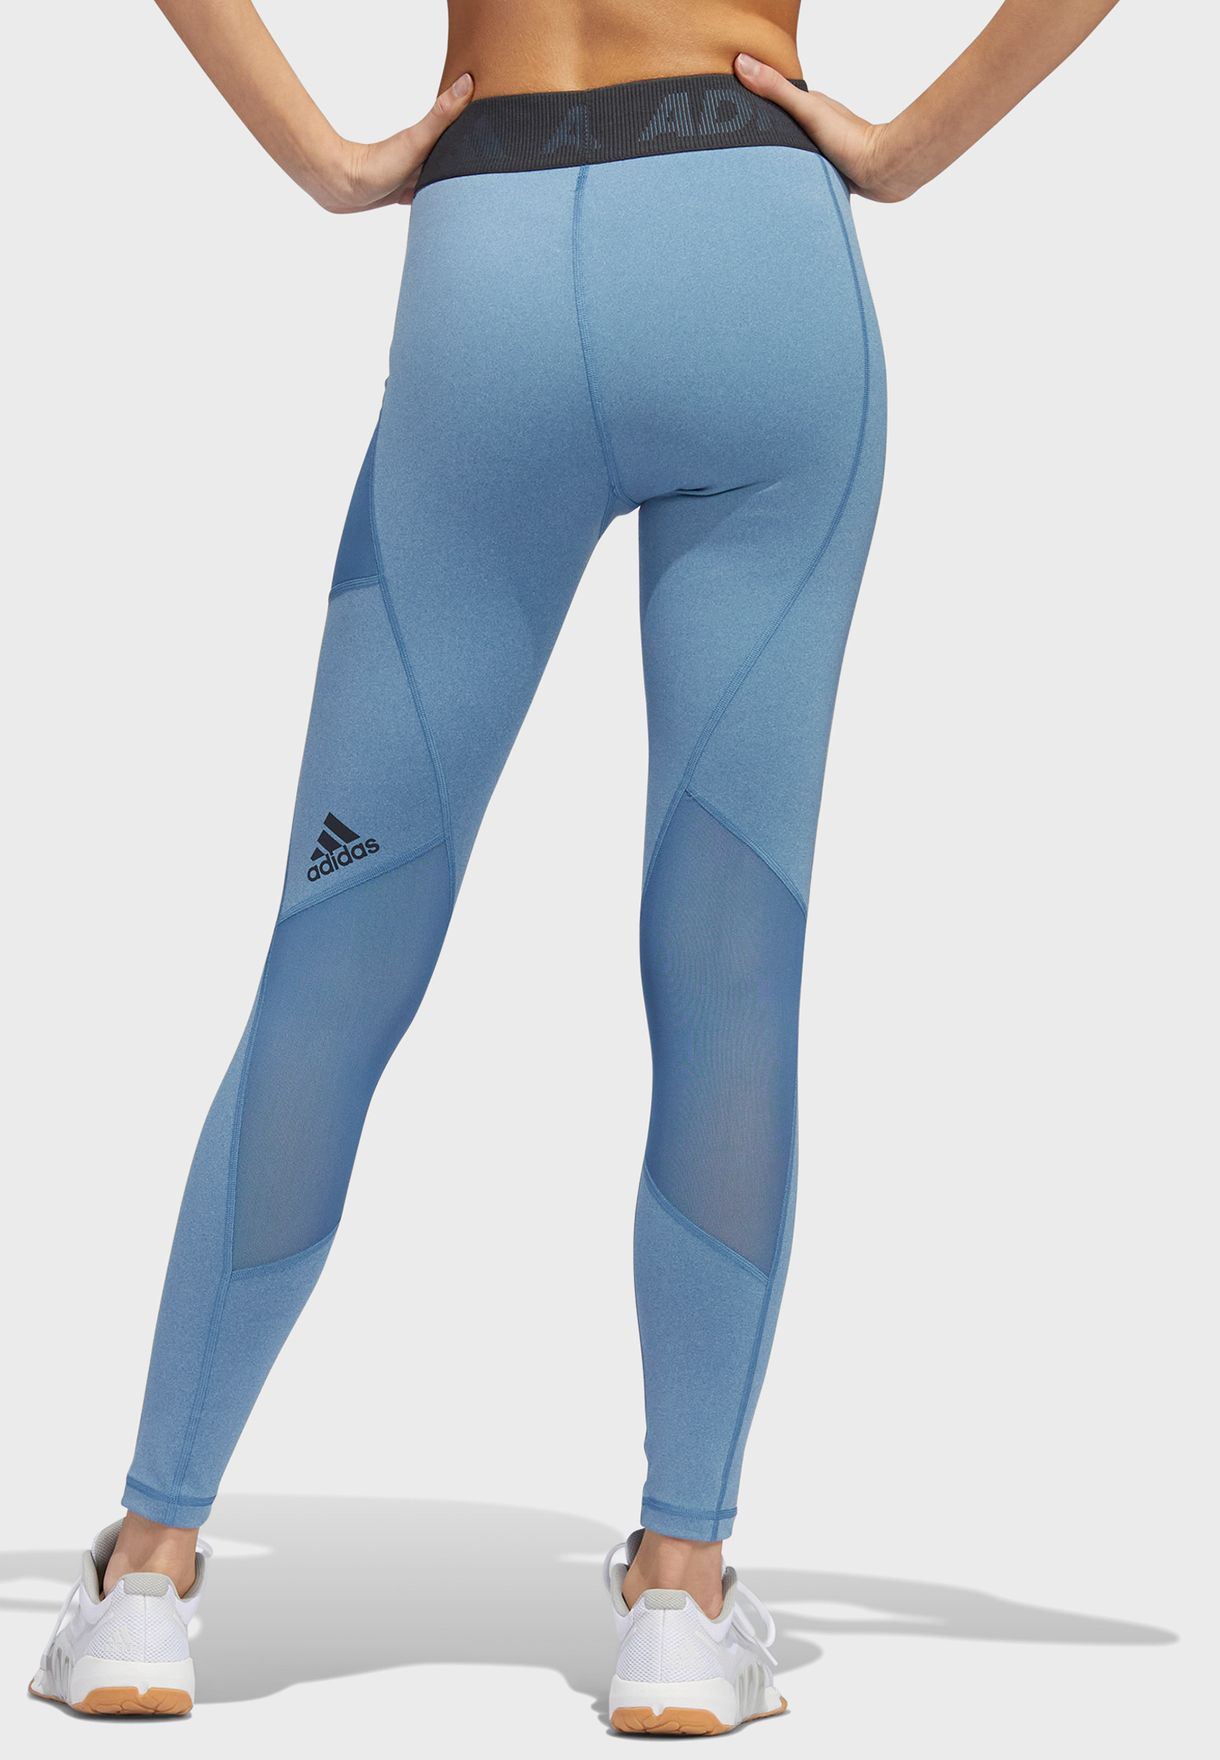 Techfit Badge Of Sport Tights